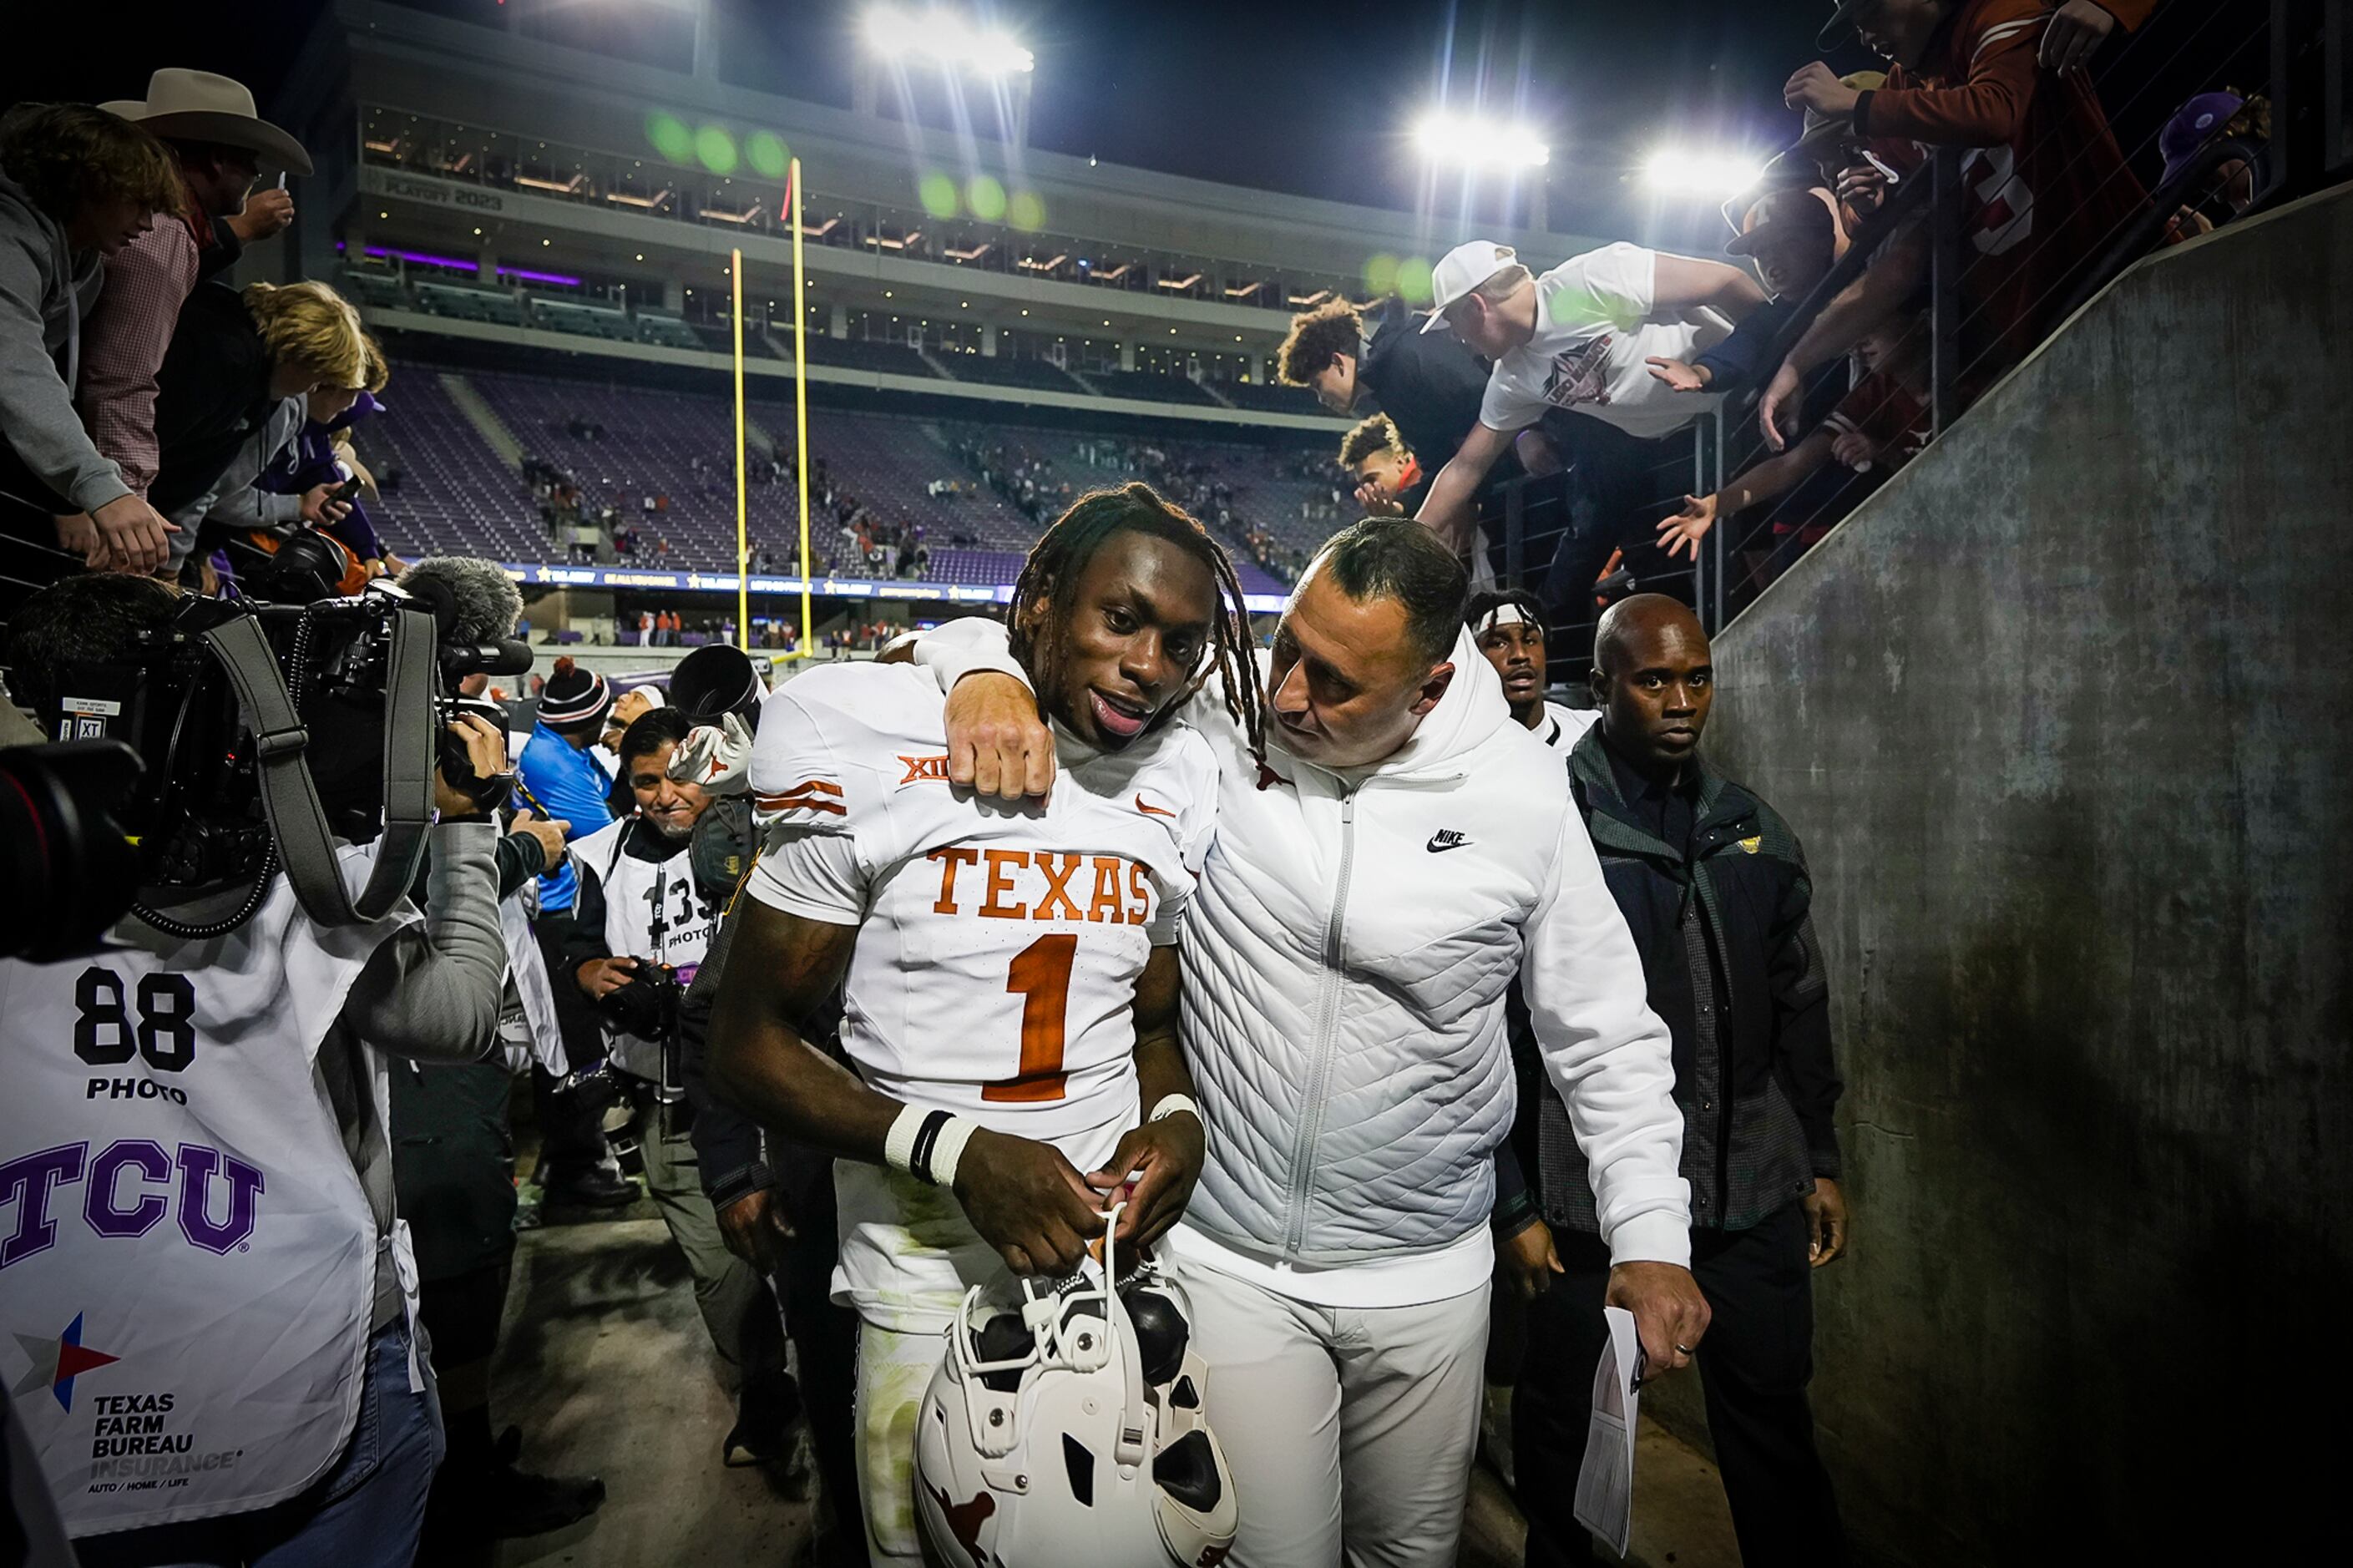 Texas remains at No. 7 in the College Football Playoff rankings